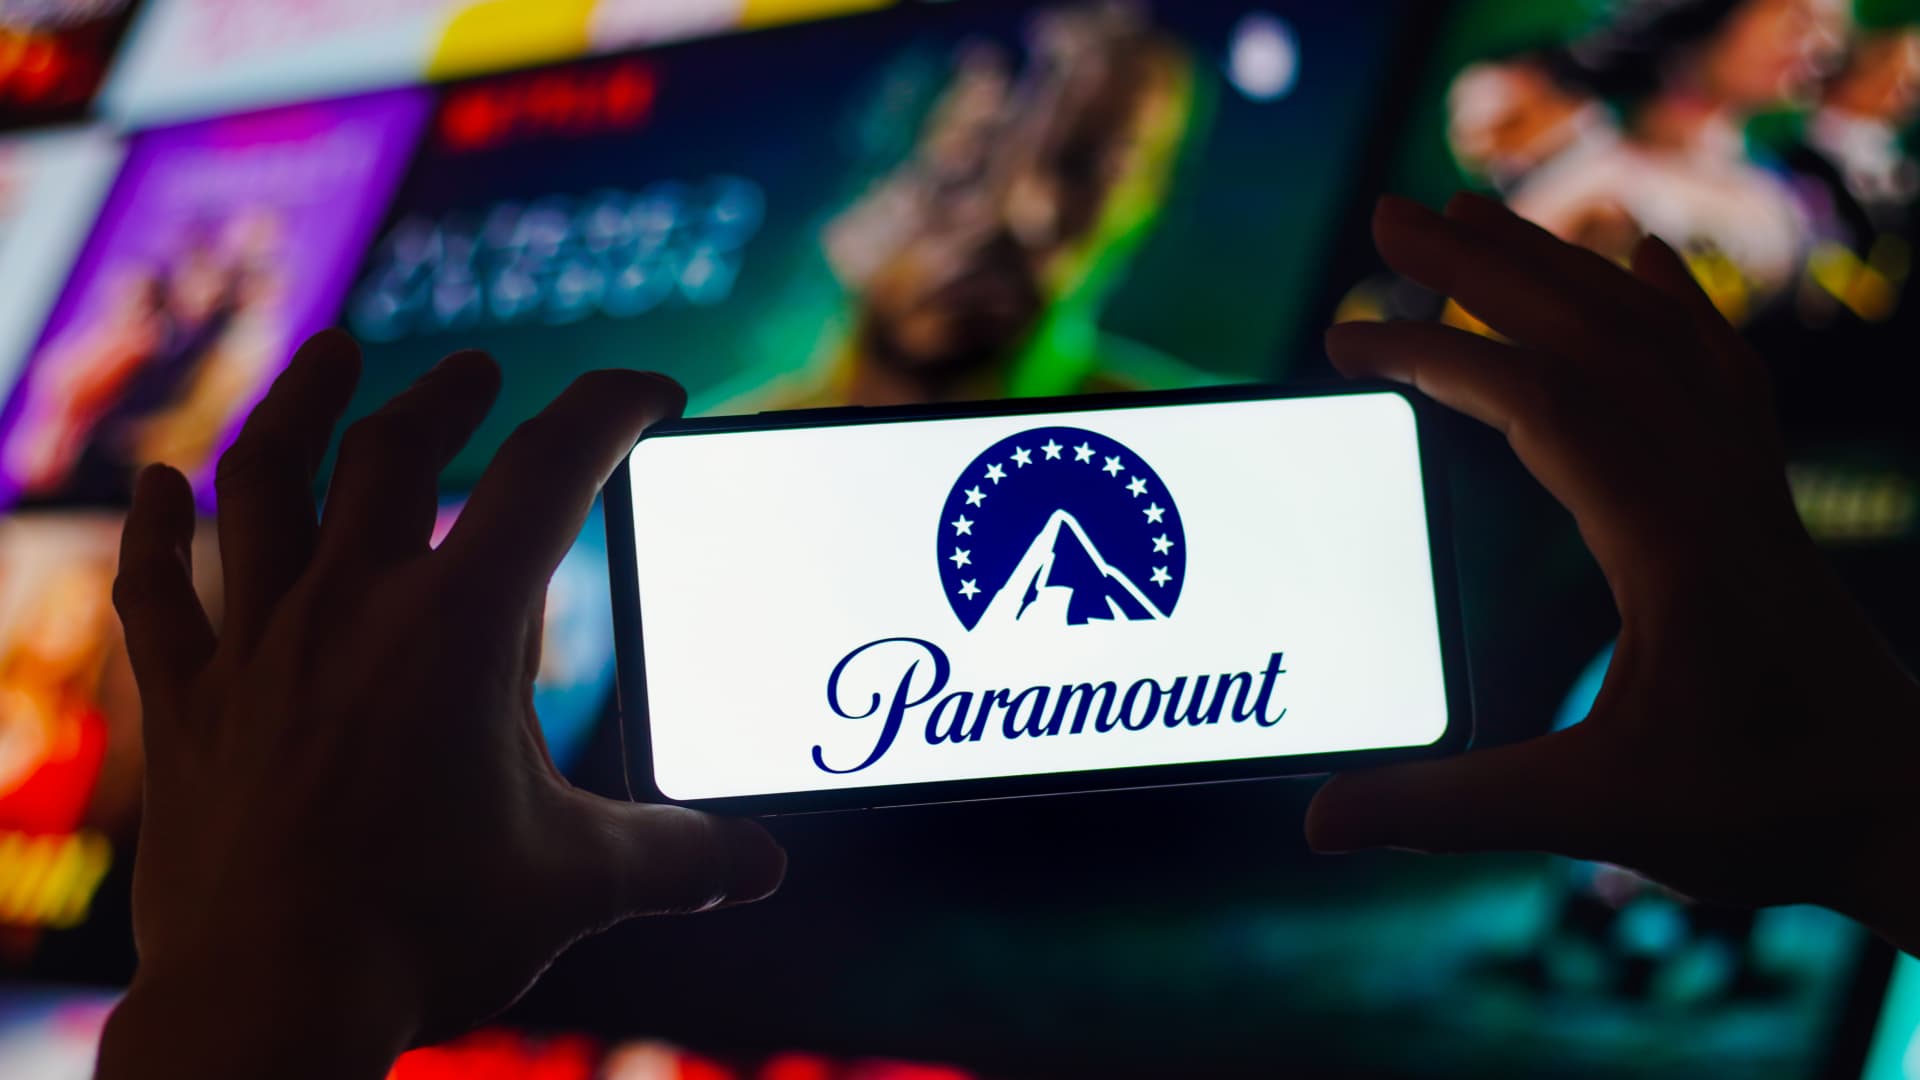 Paramount Global shares fall over 25% after weak earnings report, dividend cut